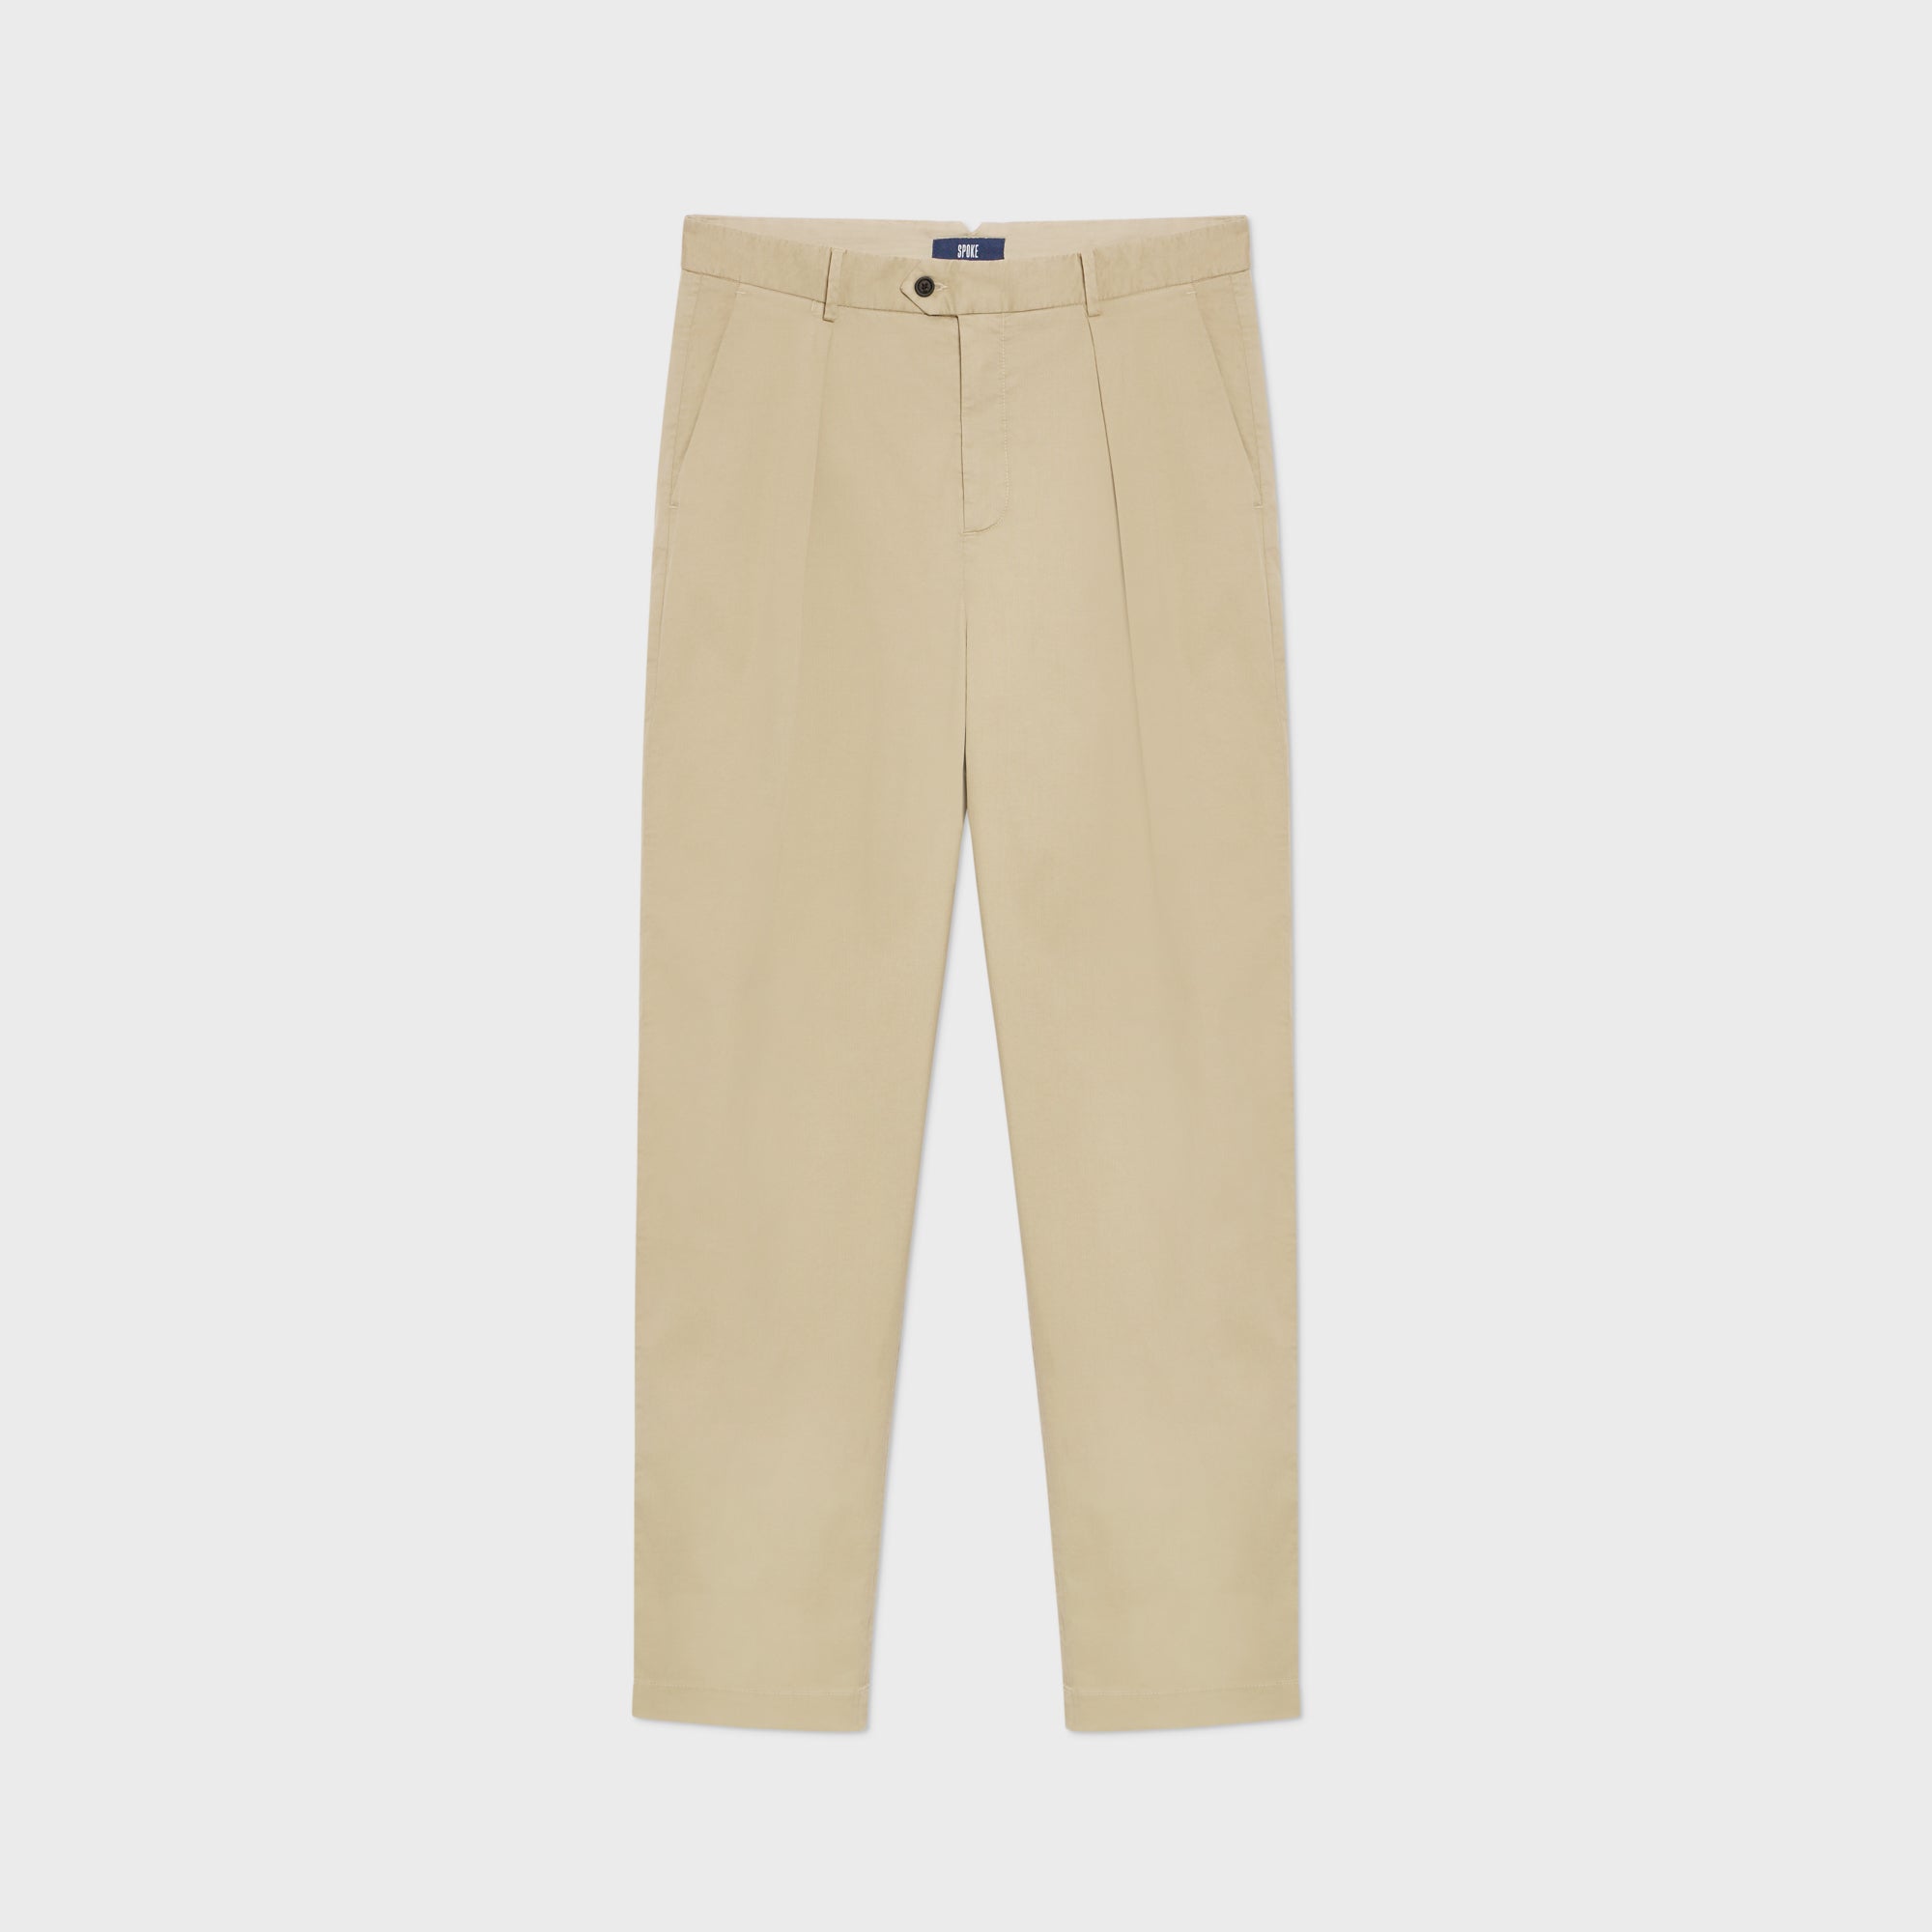 What Is The Difference Between Trousers And Chinos?